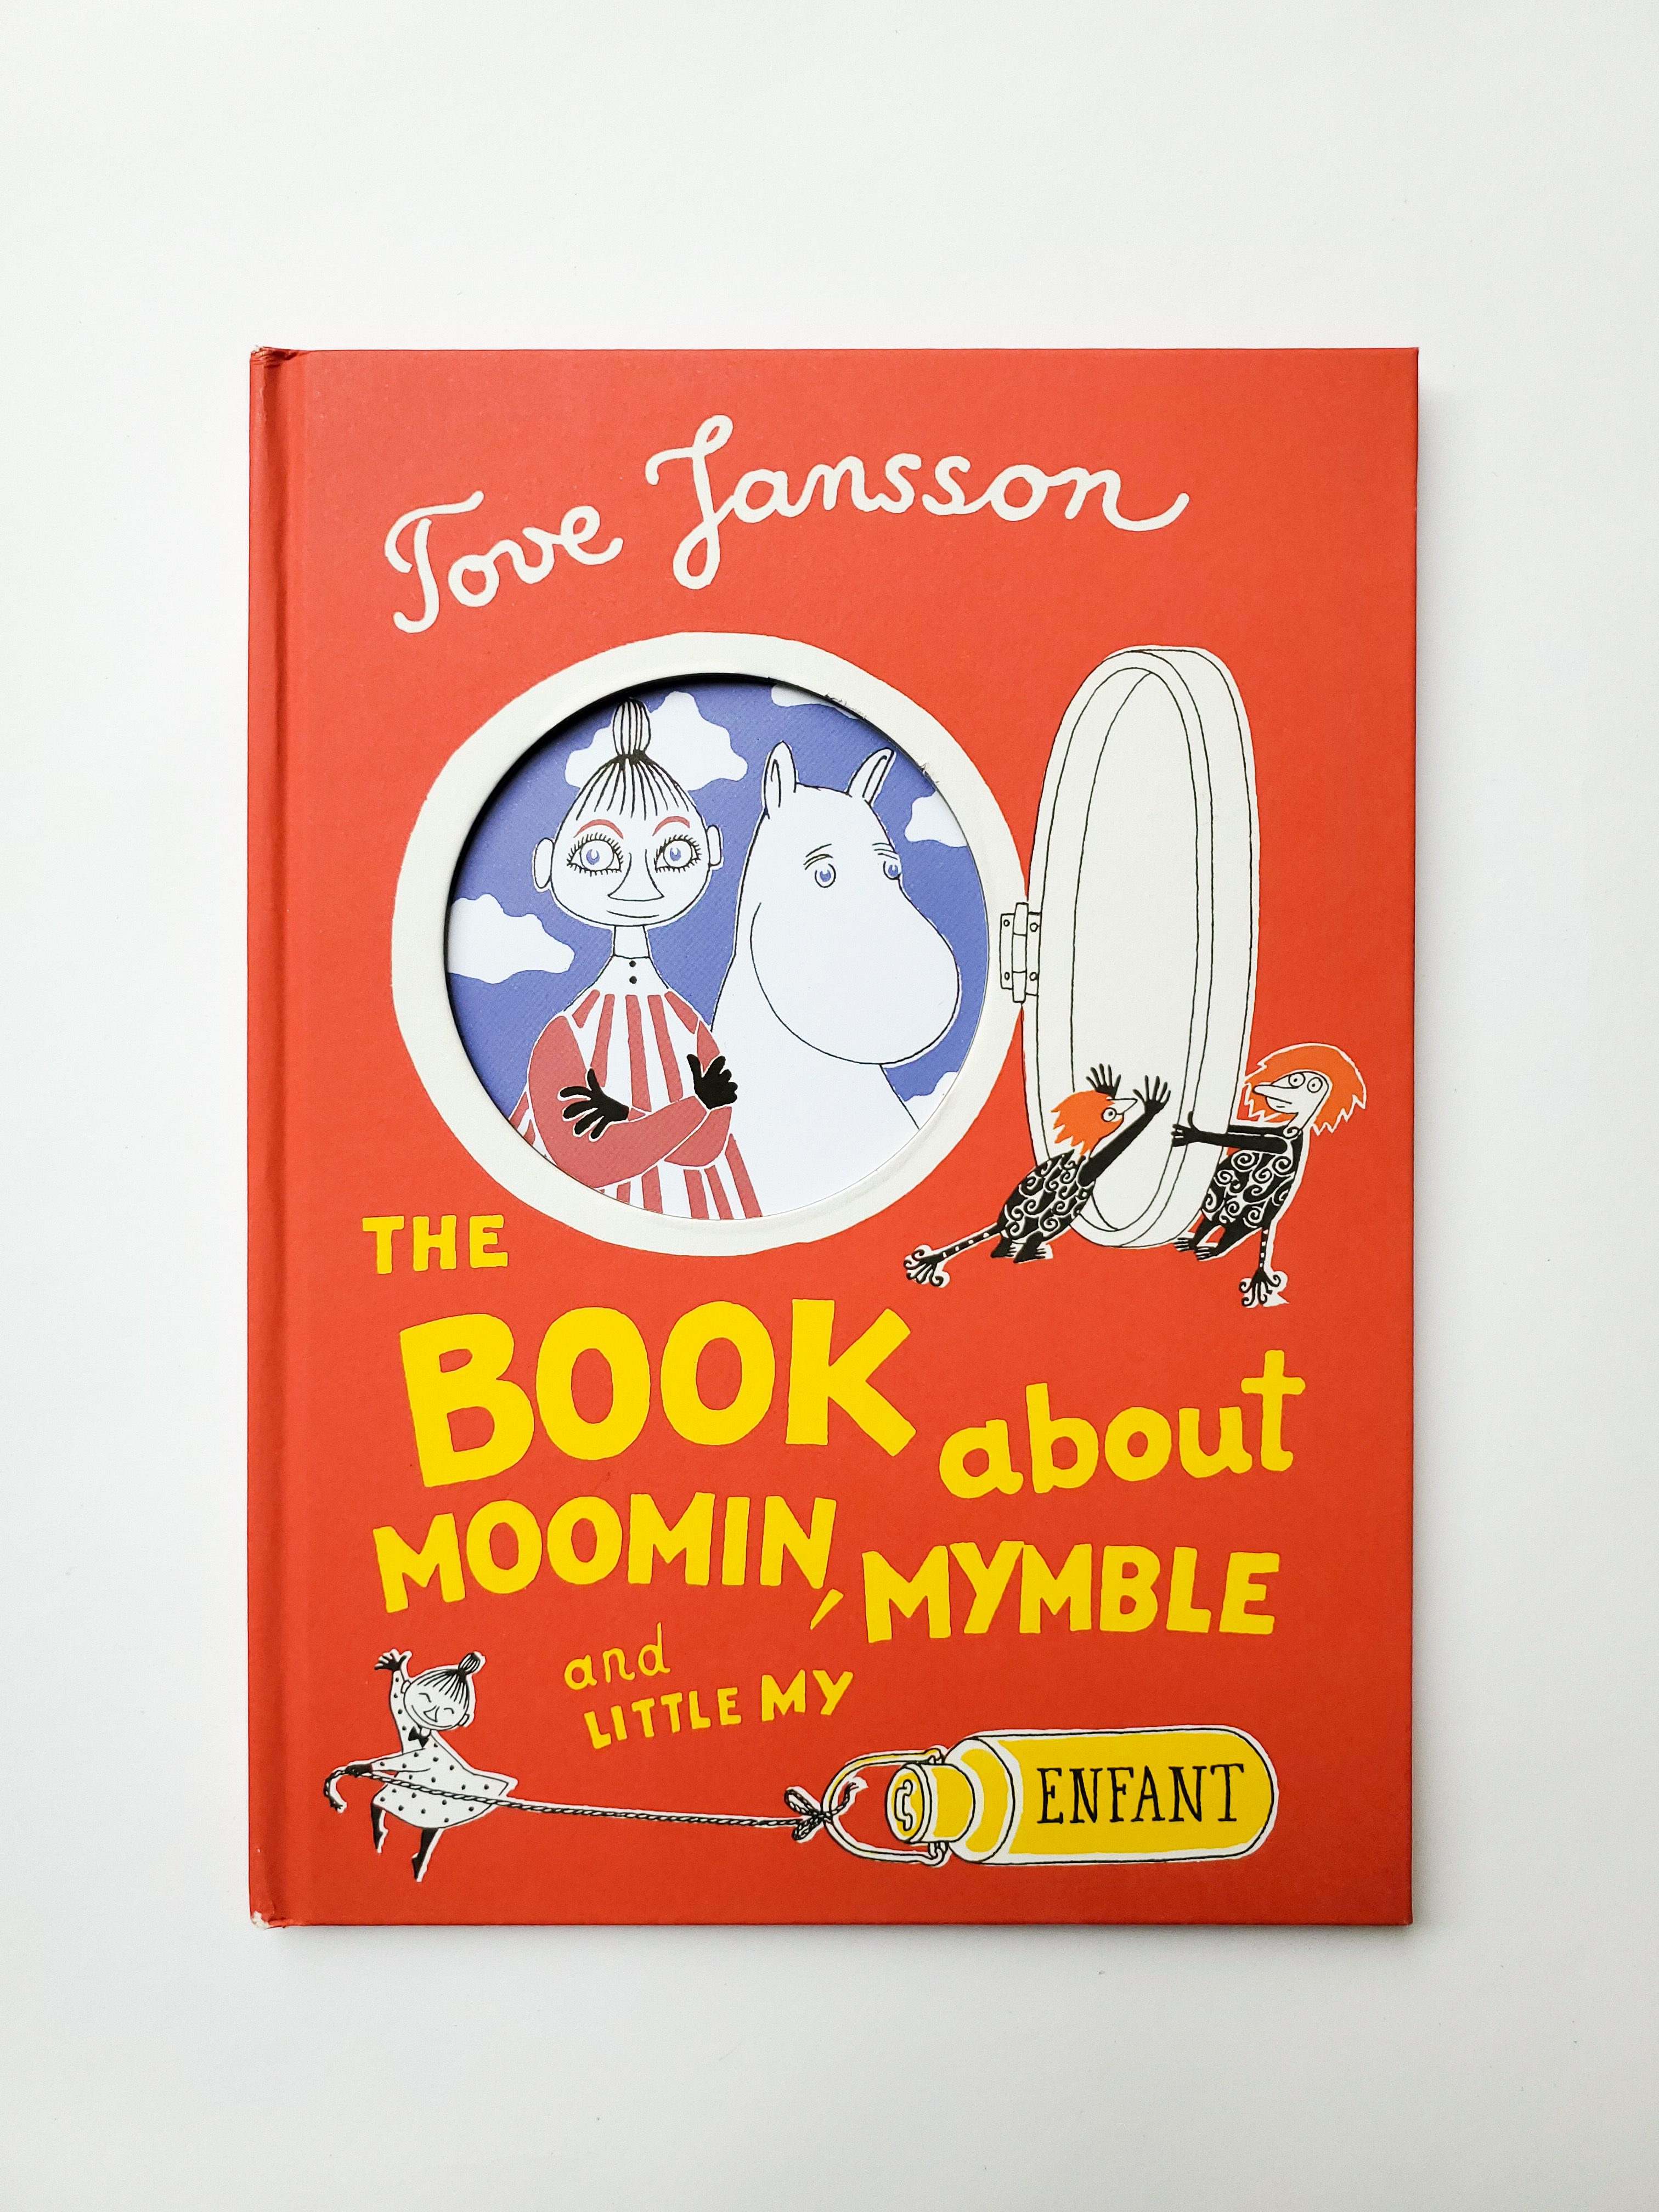 A book cover with the text 'Tove Jansson. The Book About Moomin, Mymble, and Little My. Enfant."